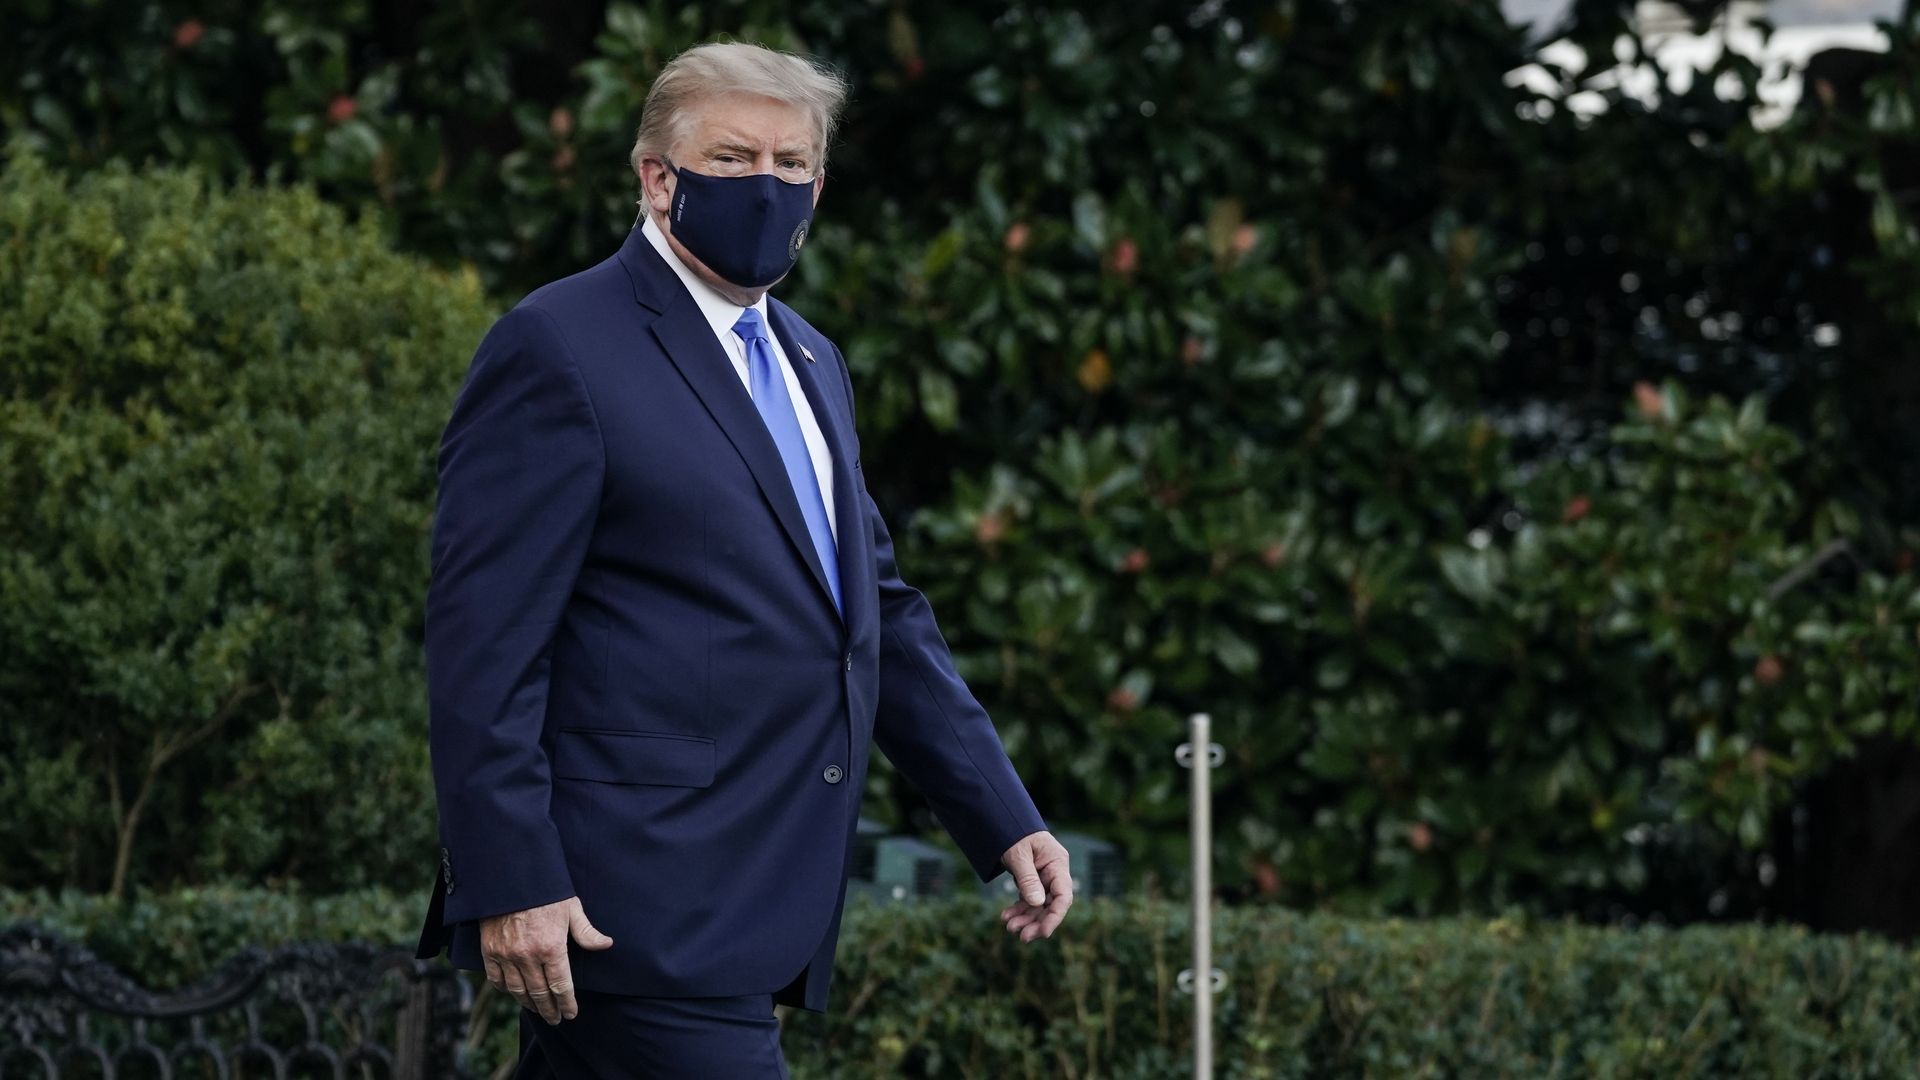 President Donald Trump leaves the White House for Walter Reed National Military Medical Center on the South Lawn of the White House on October 2